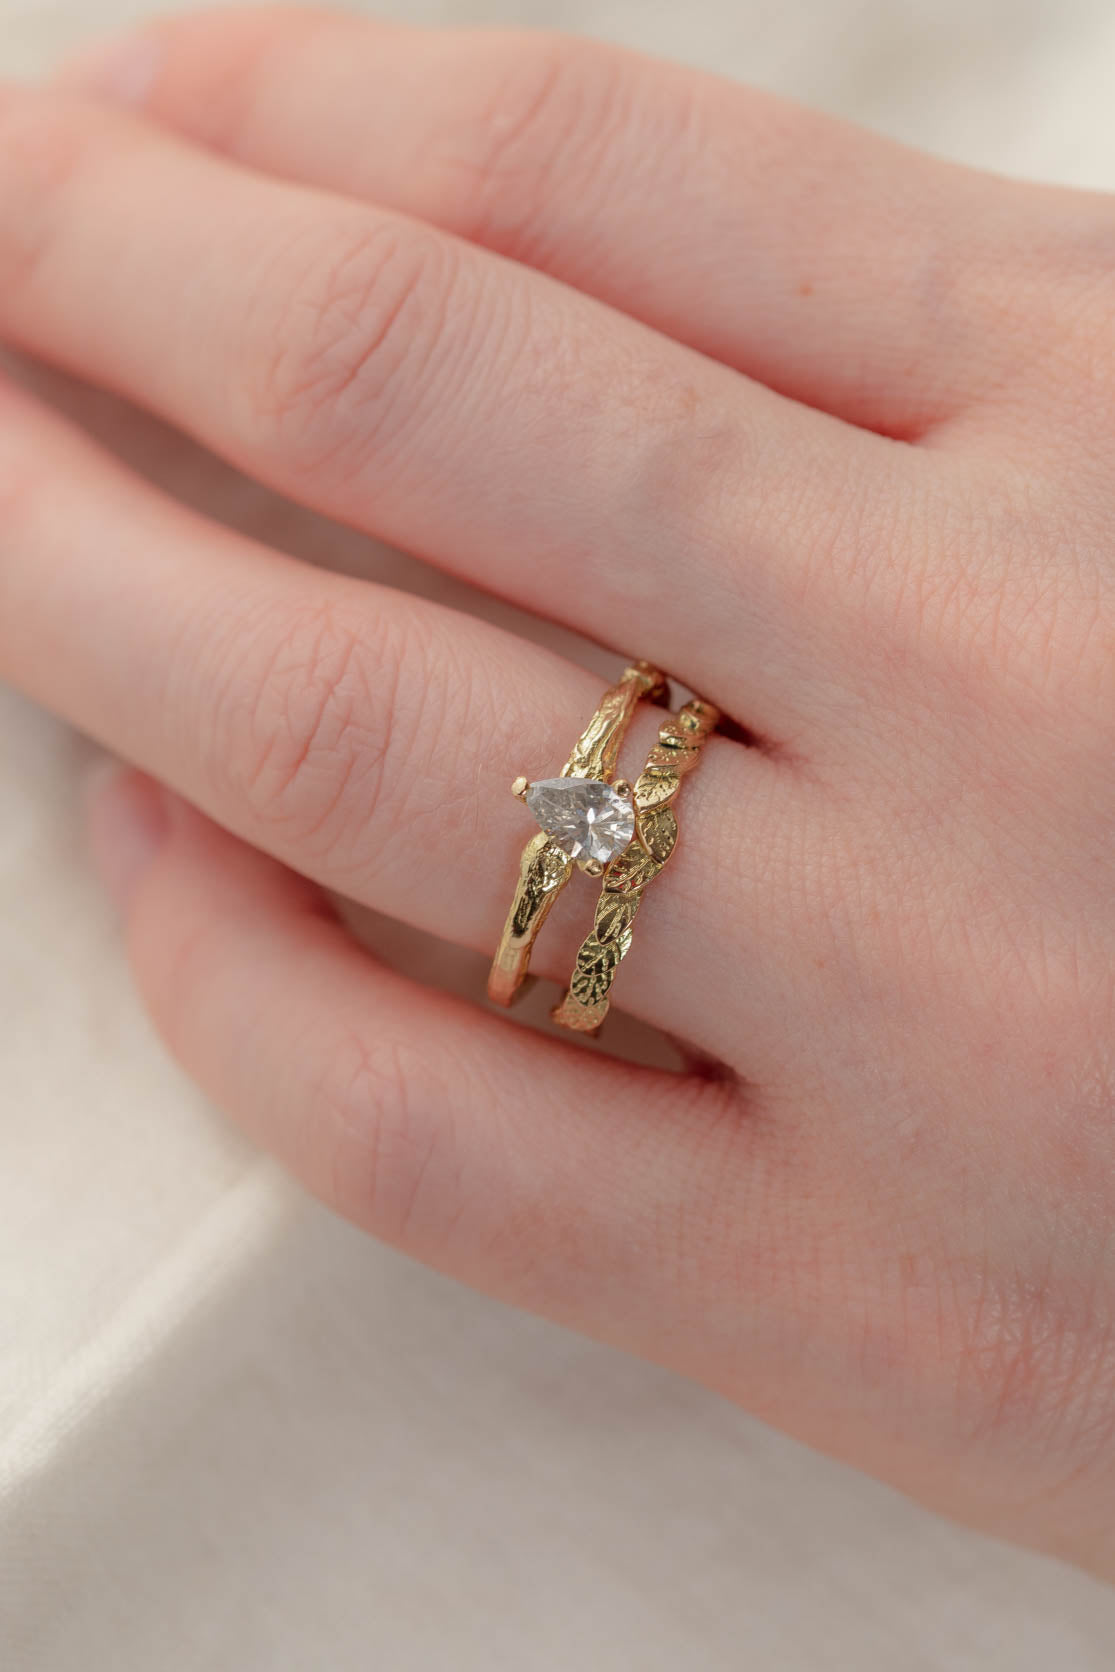 Handmade Solid Gold Twig Ring With Pear Shaped Diamond worn as an alternative handmade engagement ring, stacked with our leaf wedding ring.